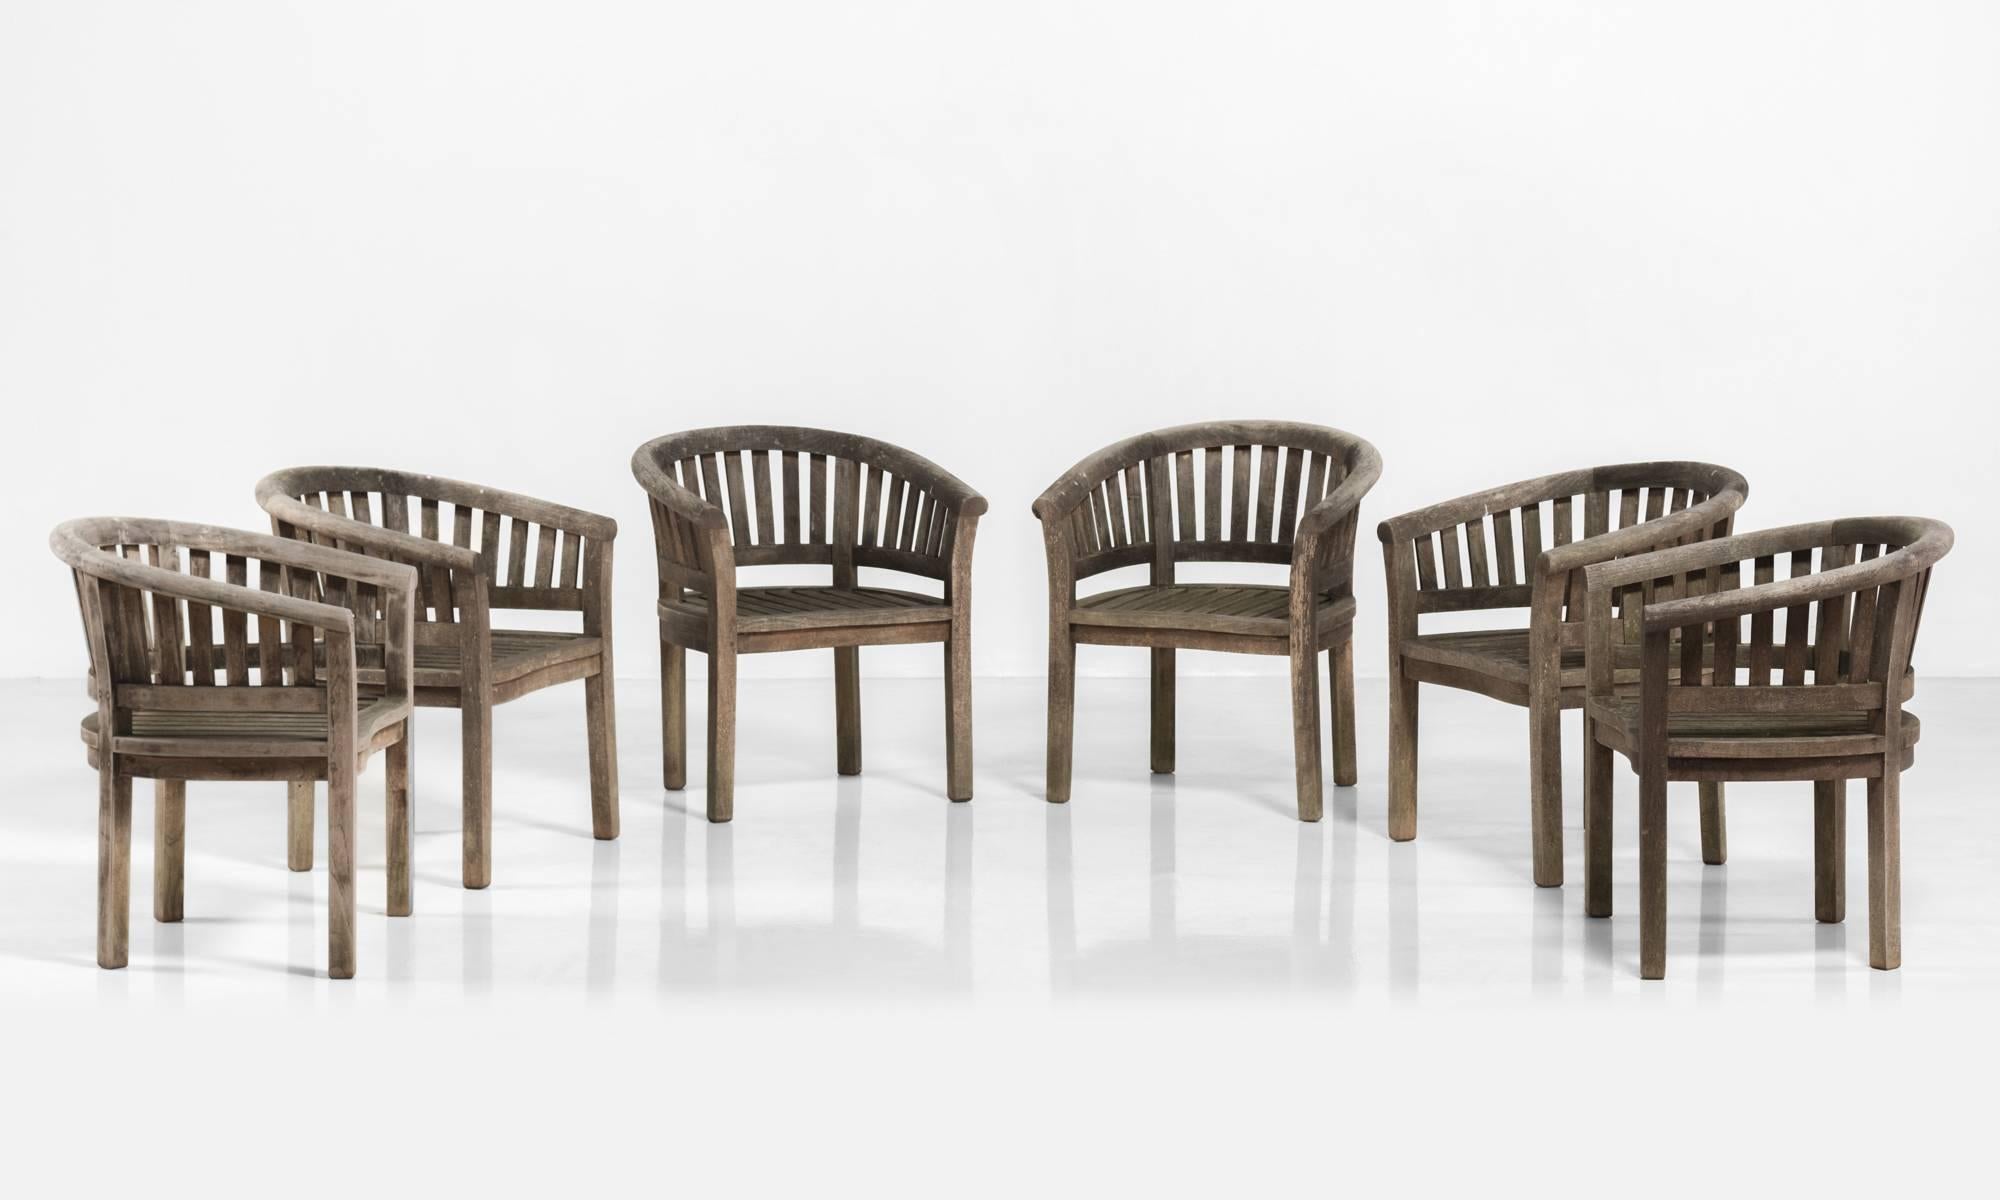 Teak garden chairs, circa 1950.

Curved hardwood chairs with slatted seats and back.